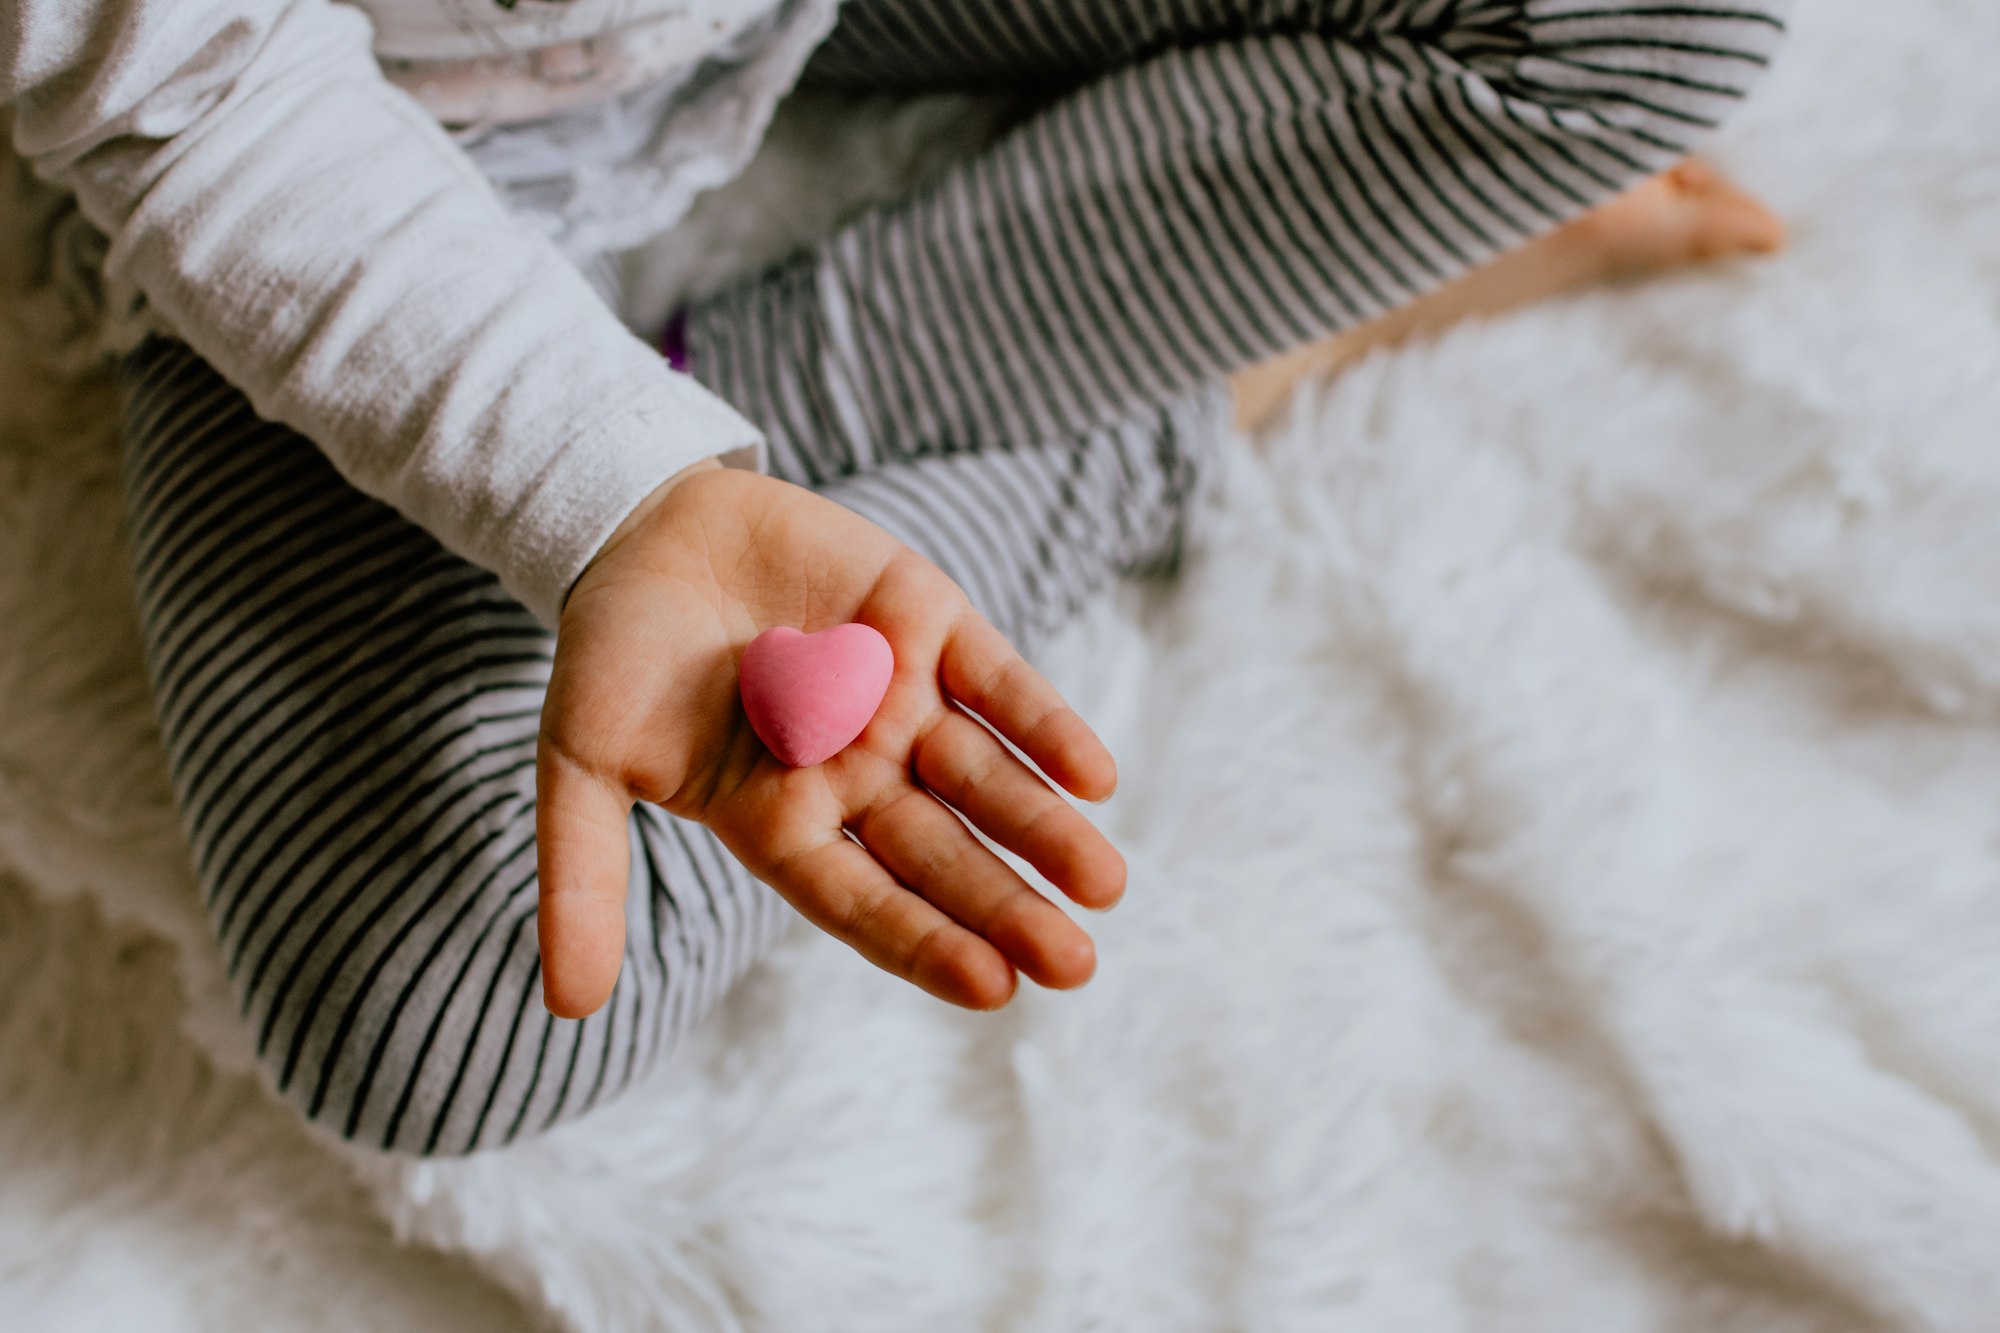 Child’s hand holding a pink heart toy 